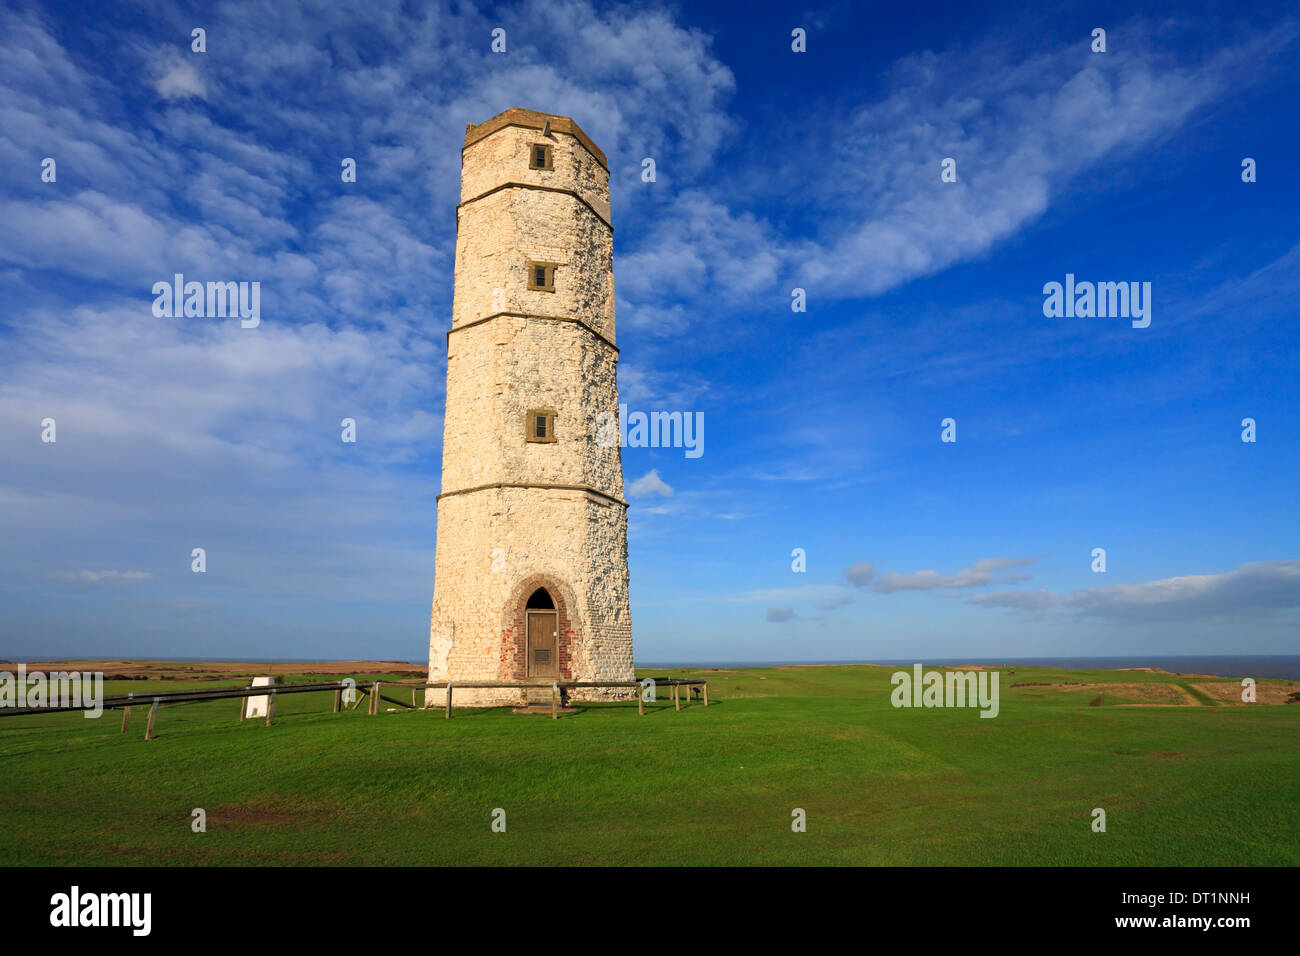 The Old Flamborough Lighthouse, the chalk tower is the only surviving light tower in England, Flamborough, East Yorkshire, England, UK. Stock Photo